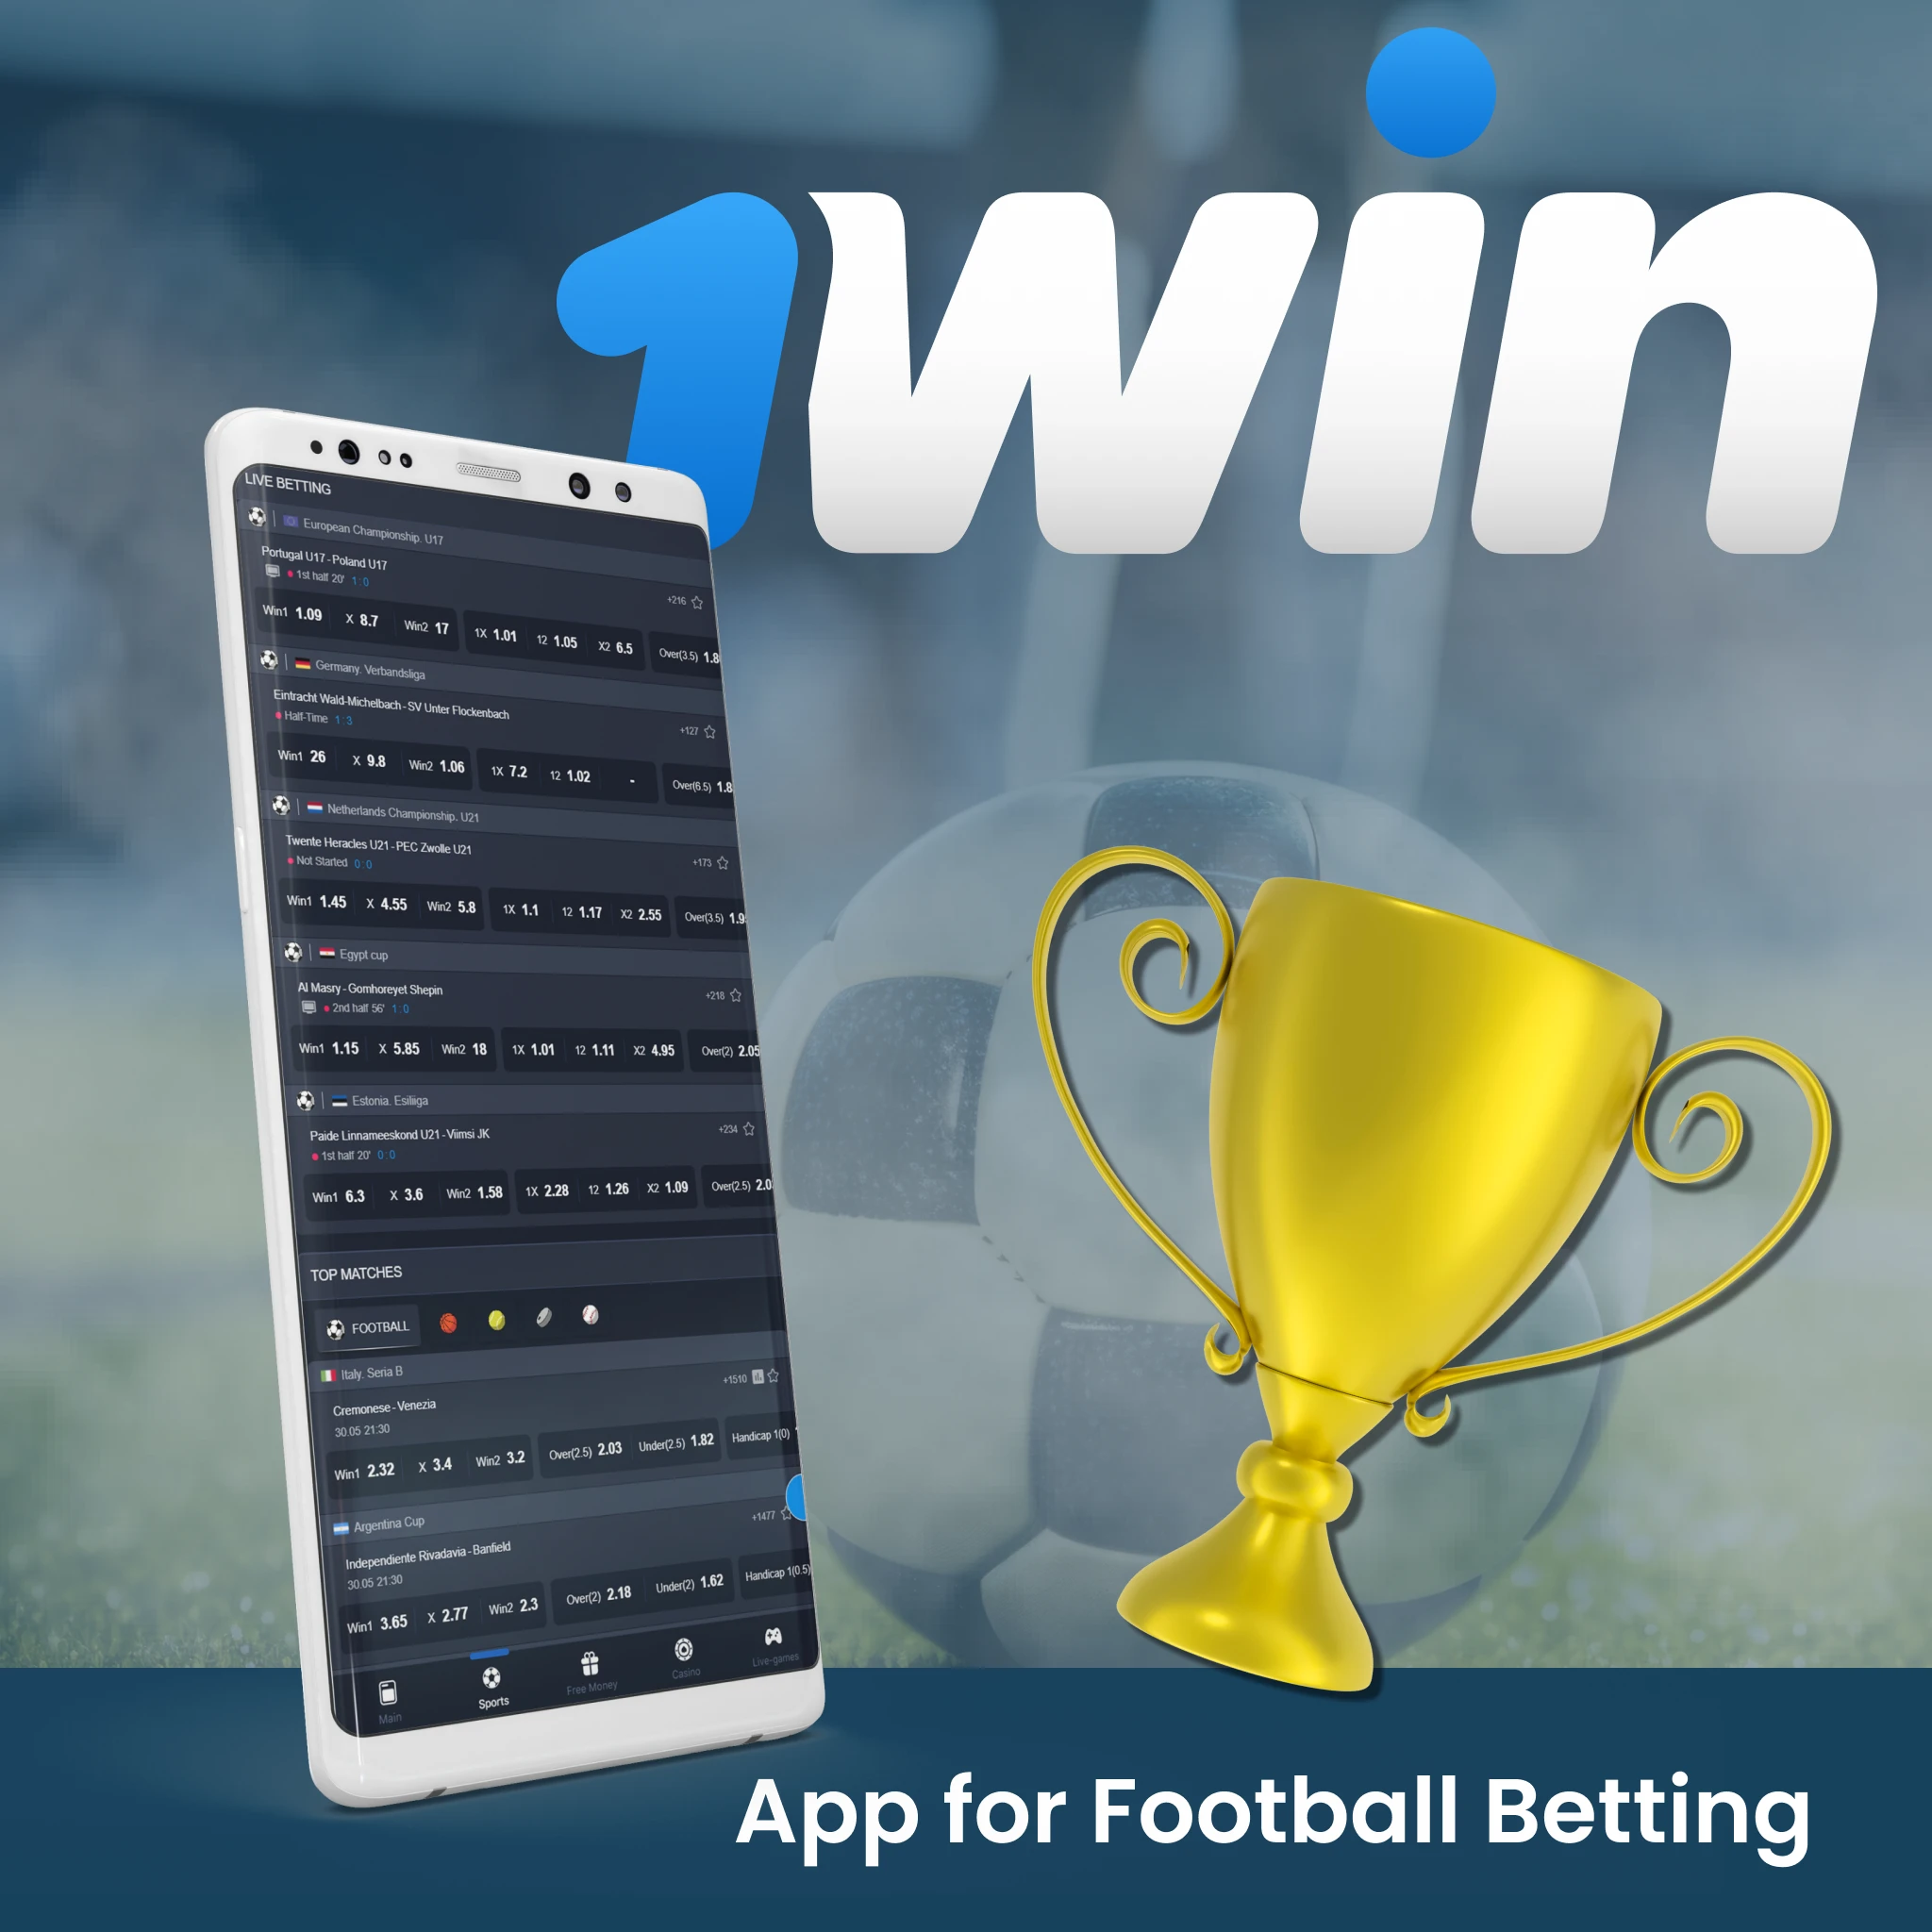 1win is an app where you can find everything you need to bet on soccer: from high odds to a variety of markets and bet types.